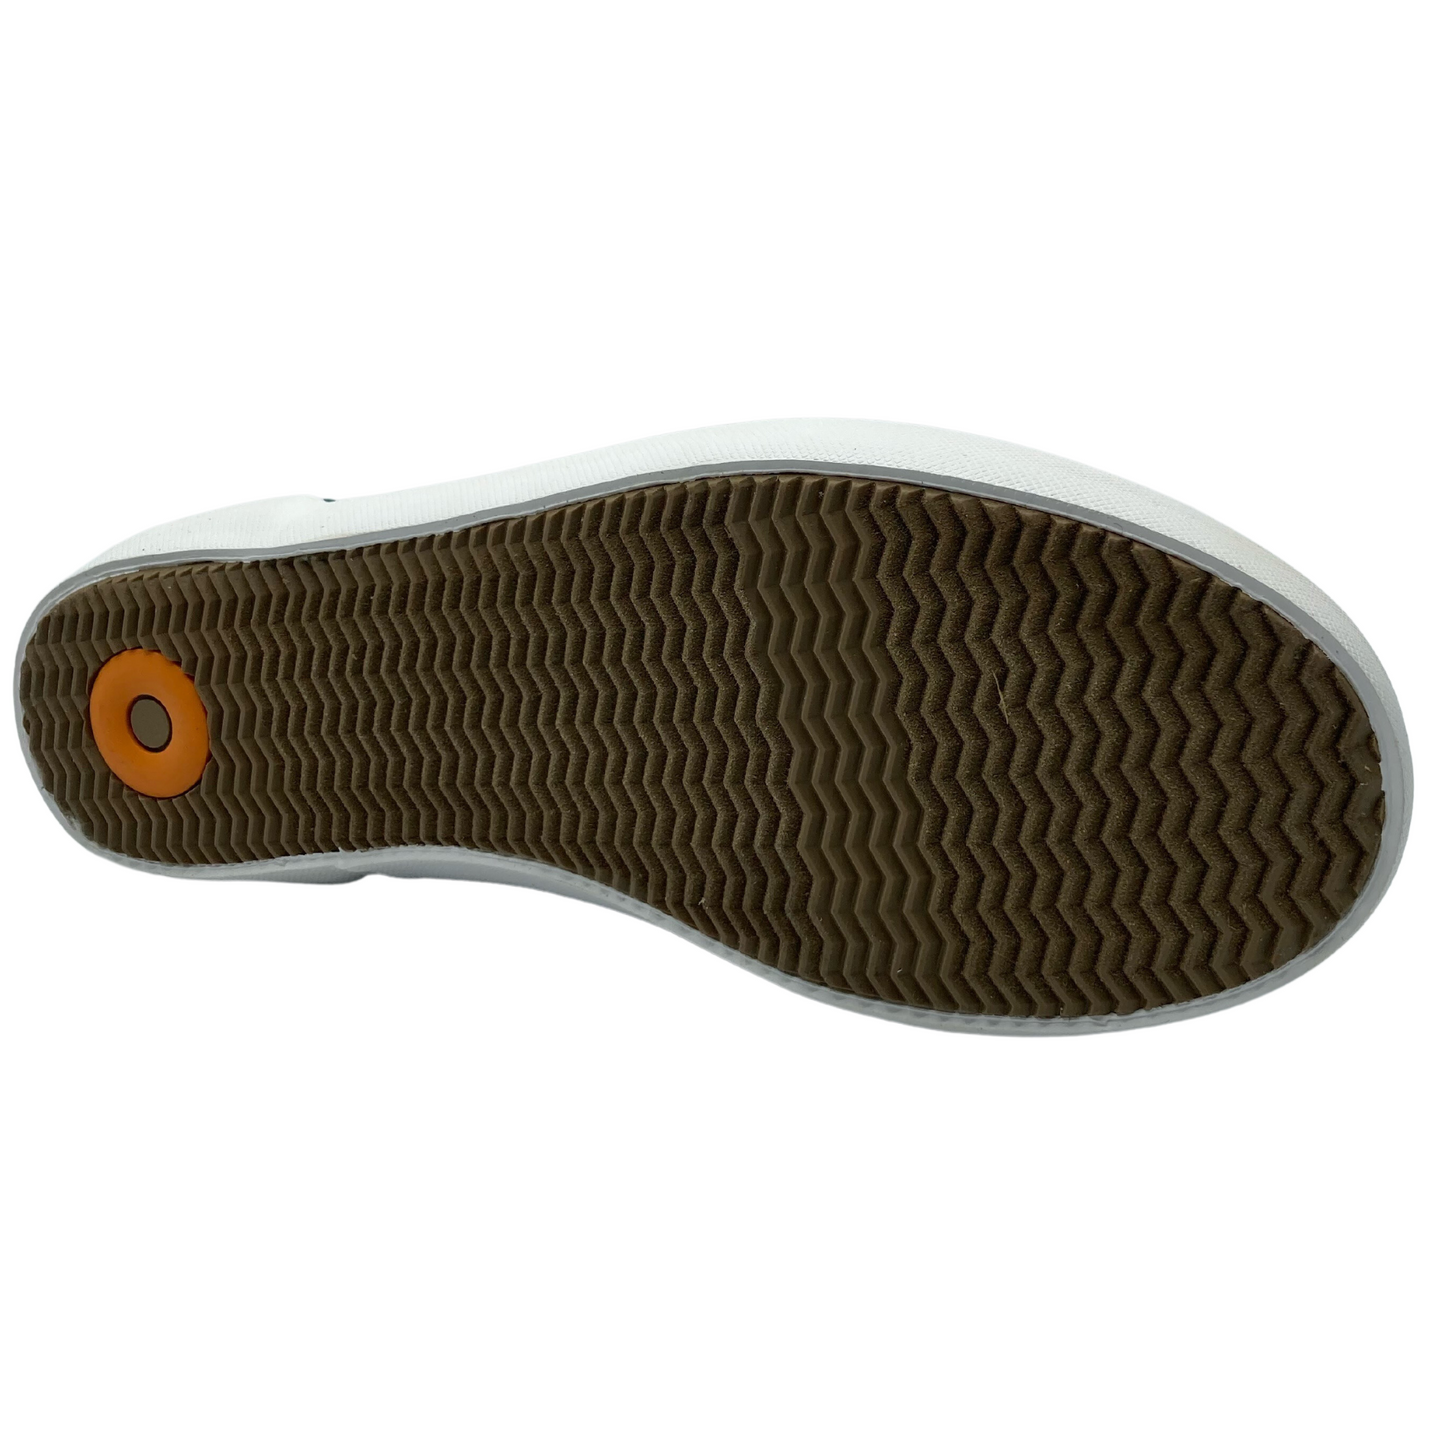 Bottom view of short boot with brown rubber tread